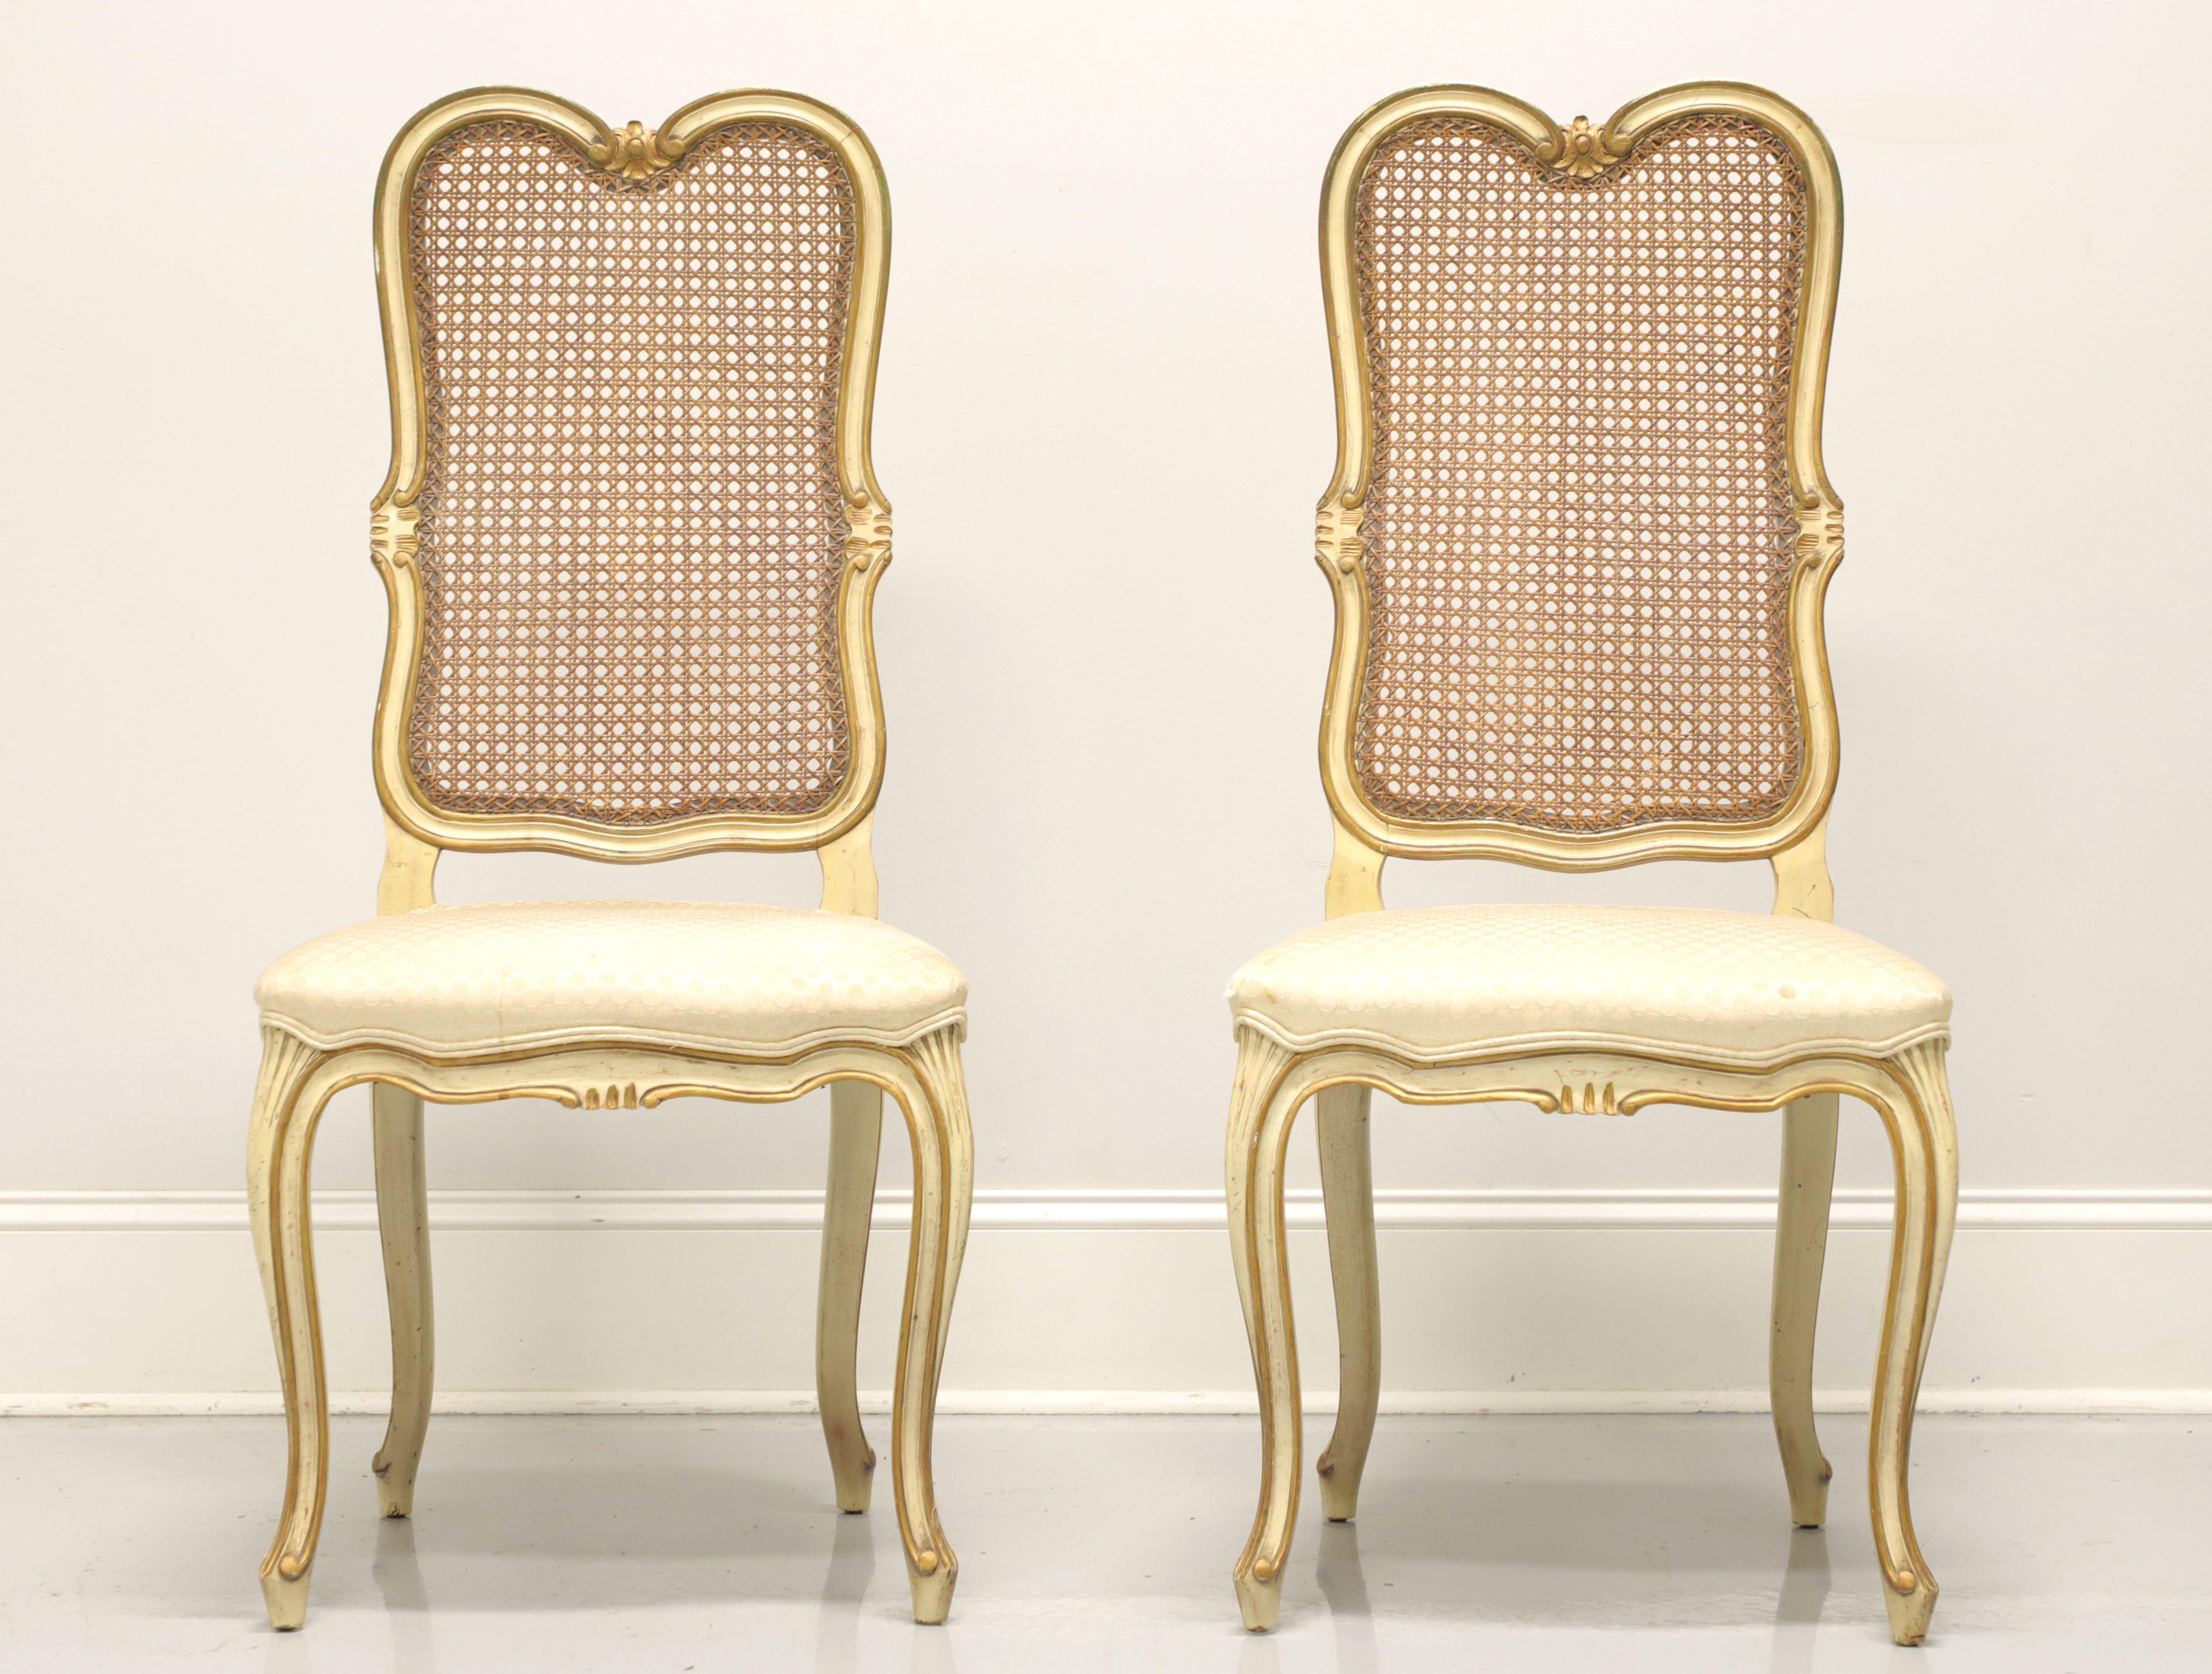 A pair of vintage French Provincial Louis XV style dining side chairs, unbranded, possibly by Davis Cabinet Co. Cherry wood painted an antique white with gold accents, cane backs, fabric upholstered seats, curved legs and scroll feet. Made in the